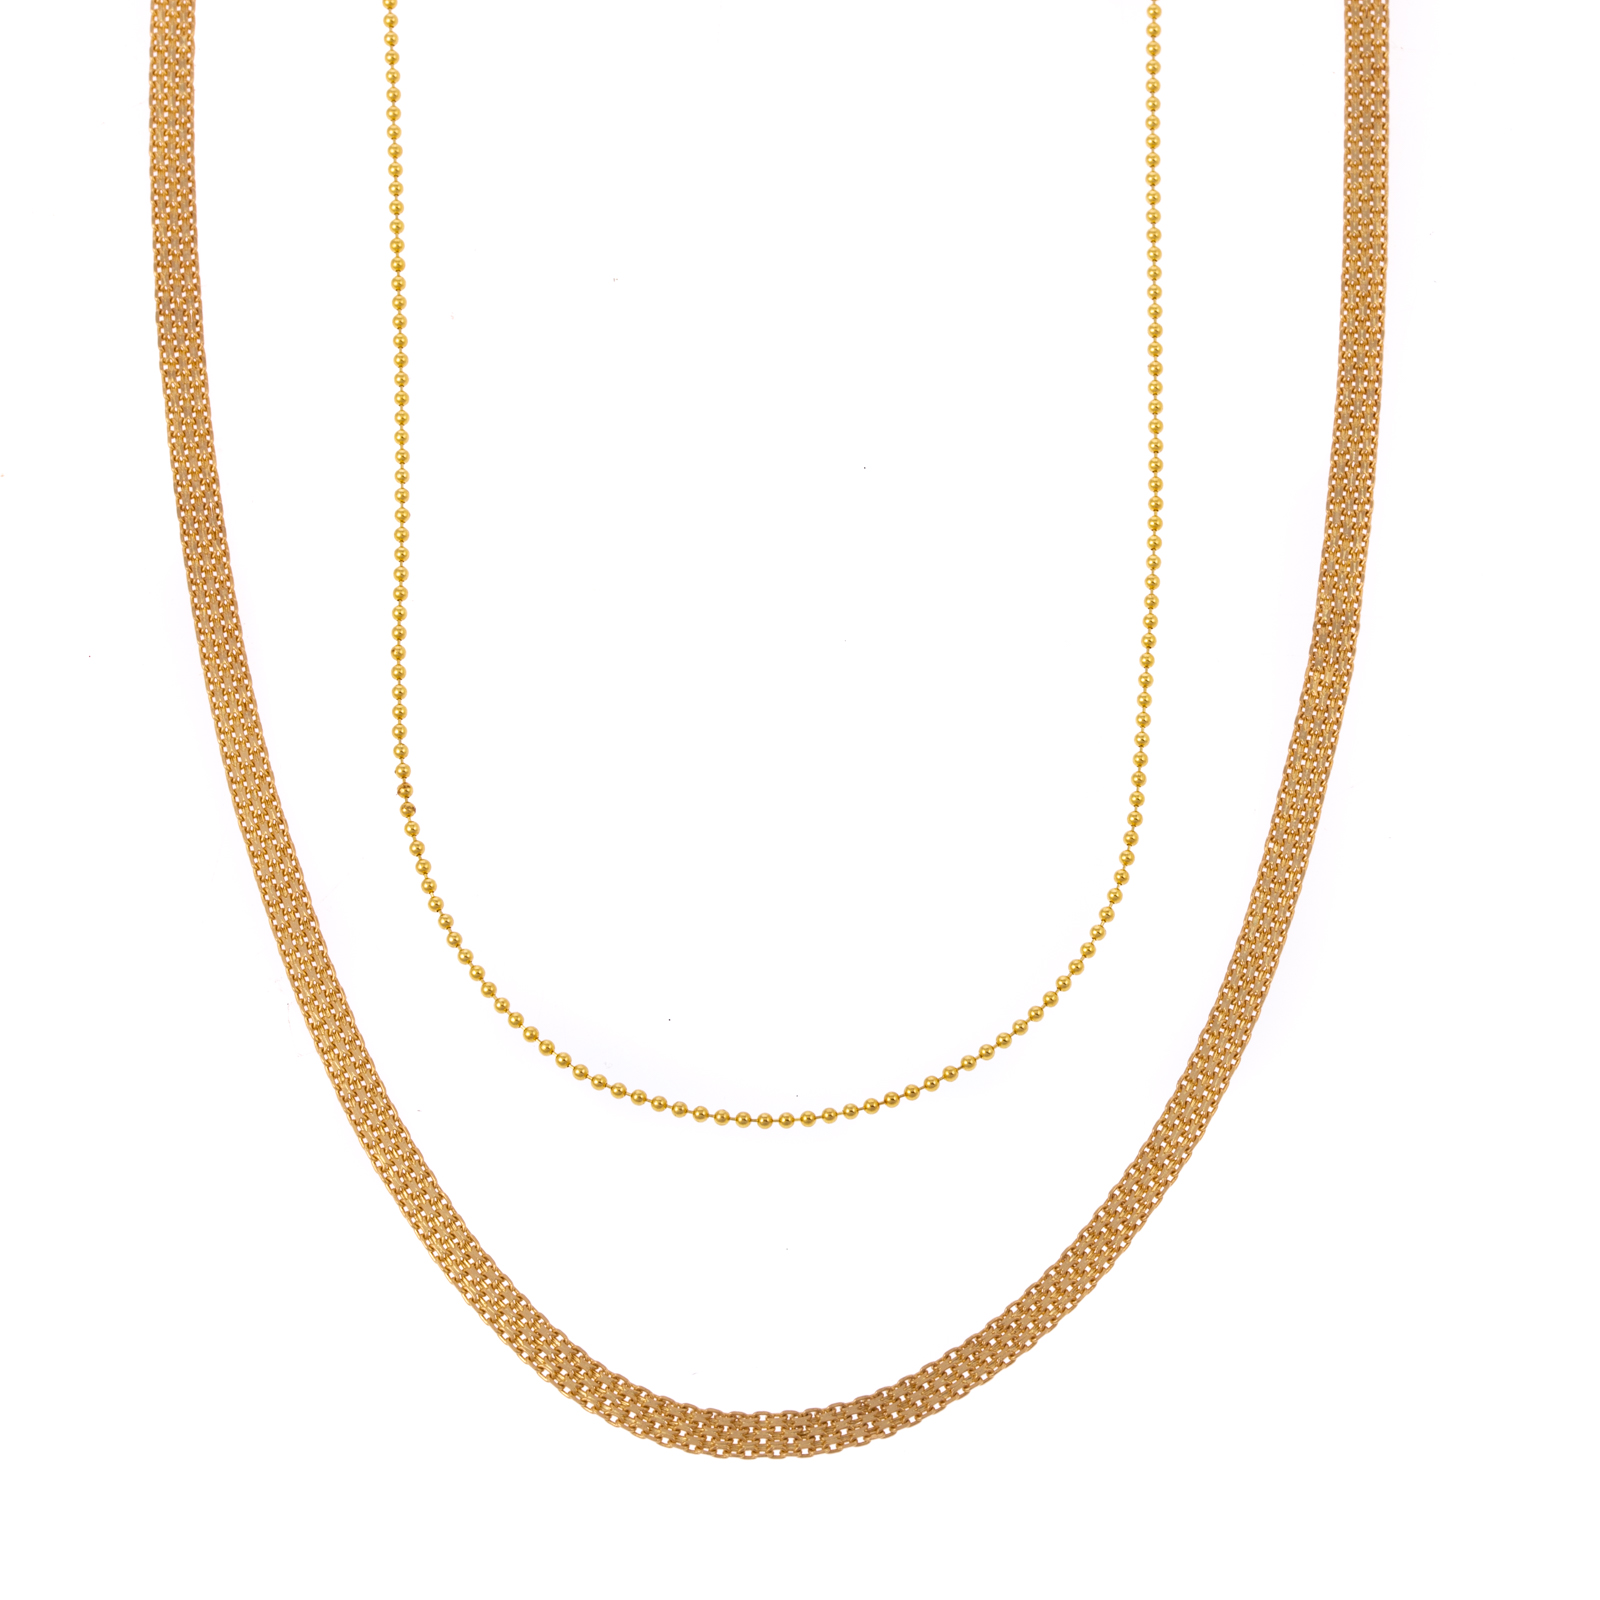 A BEAD-LINK NECKLACE & MESH-LINK